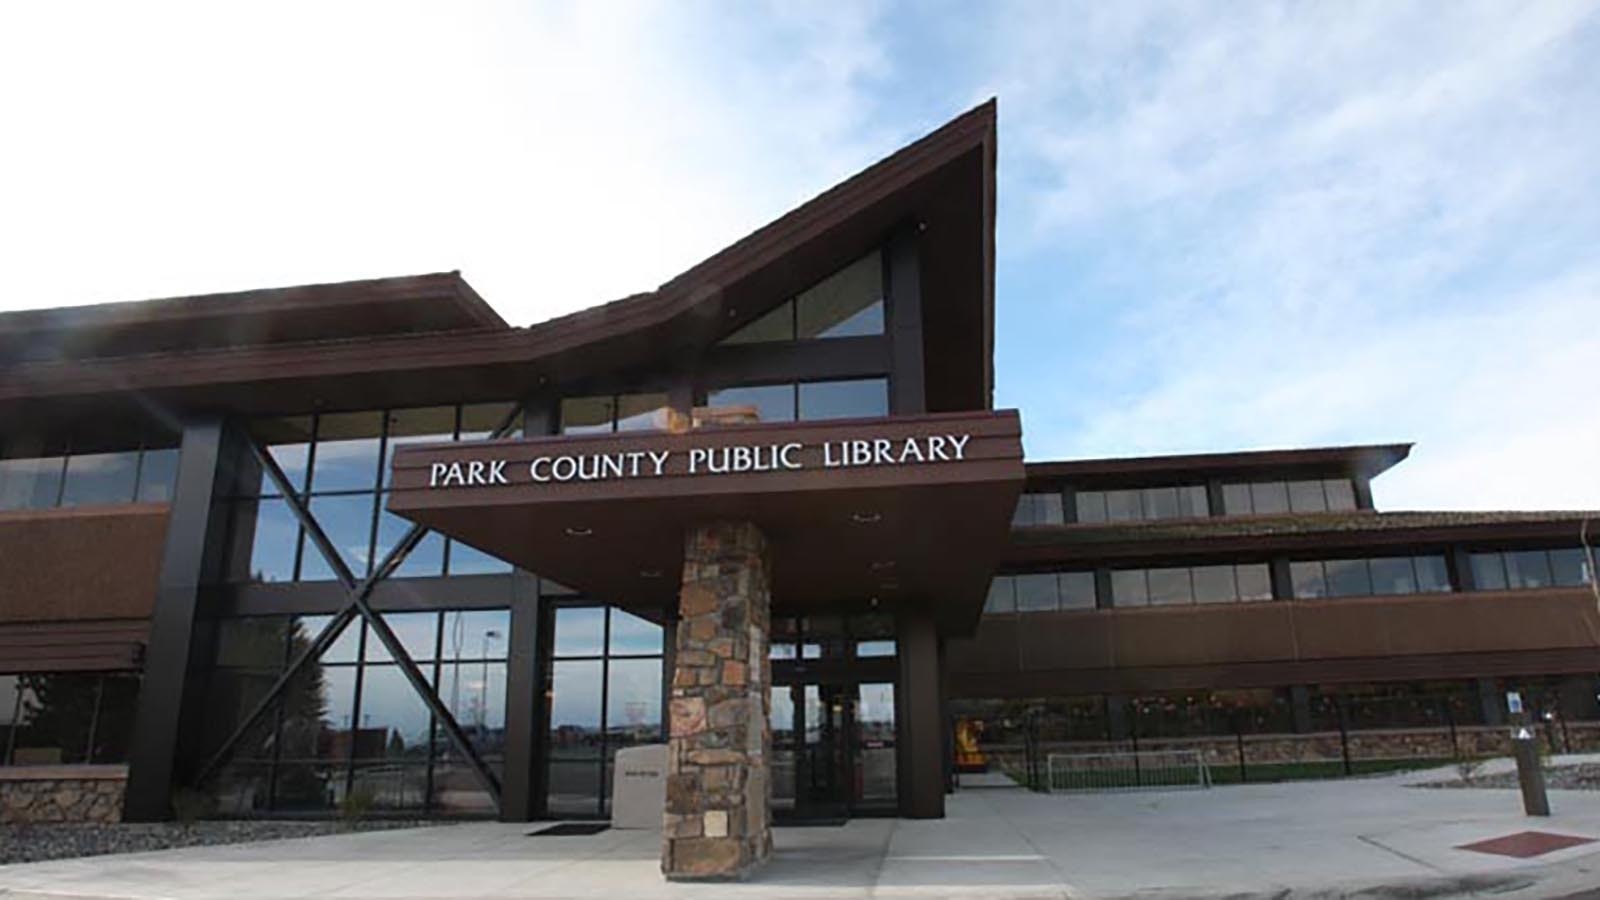 The Pardners Cafe is located inside the Park County Public Library.